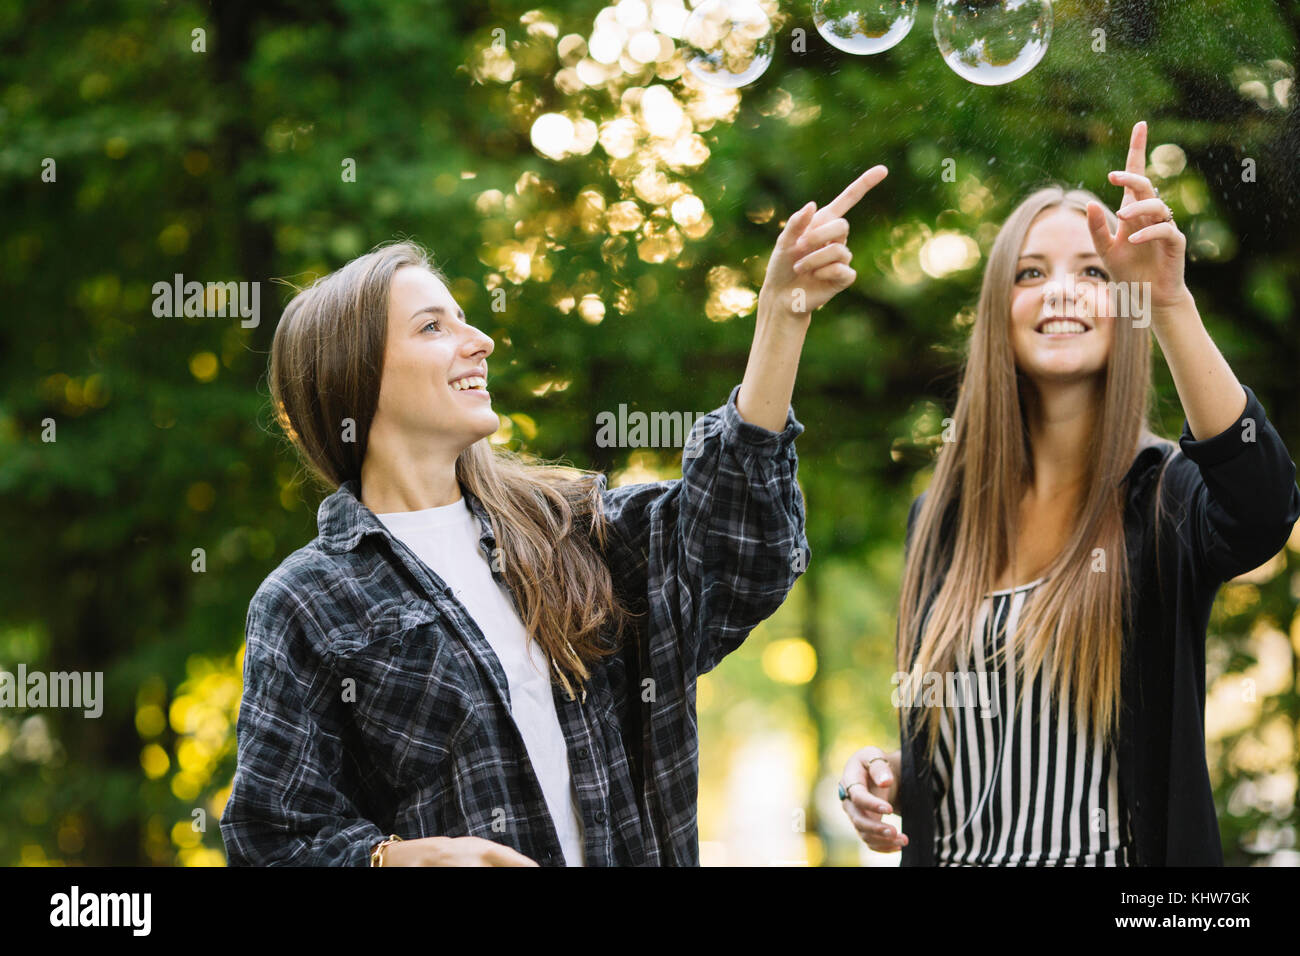 Two young female friends bursting floating bubbles in park Stock Photo